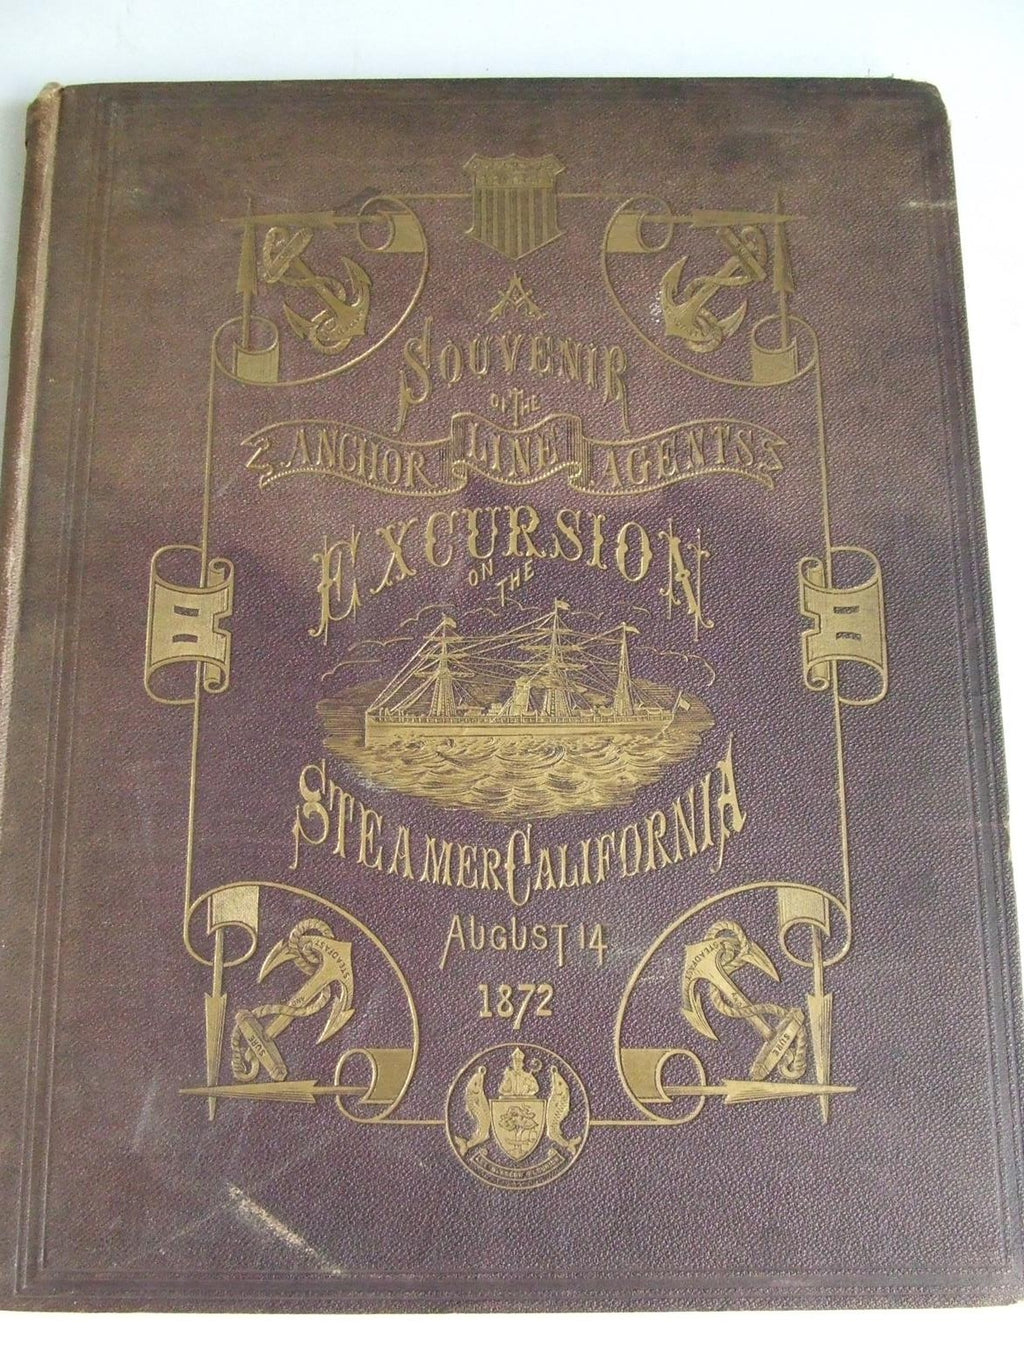 A Souvenir of the Anchor Line Agents Excursion on the Steamer California, August 14 1872